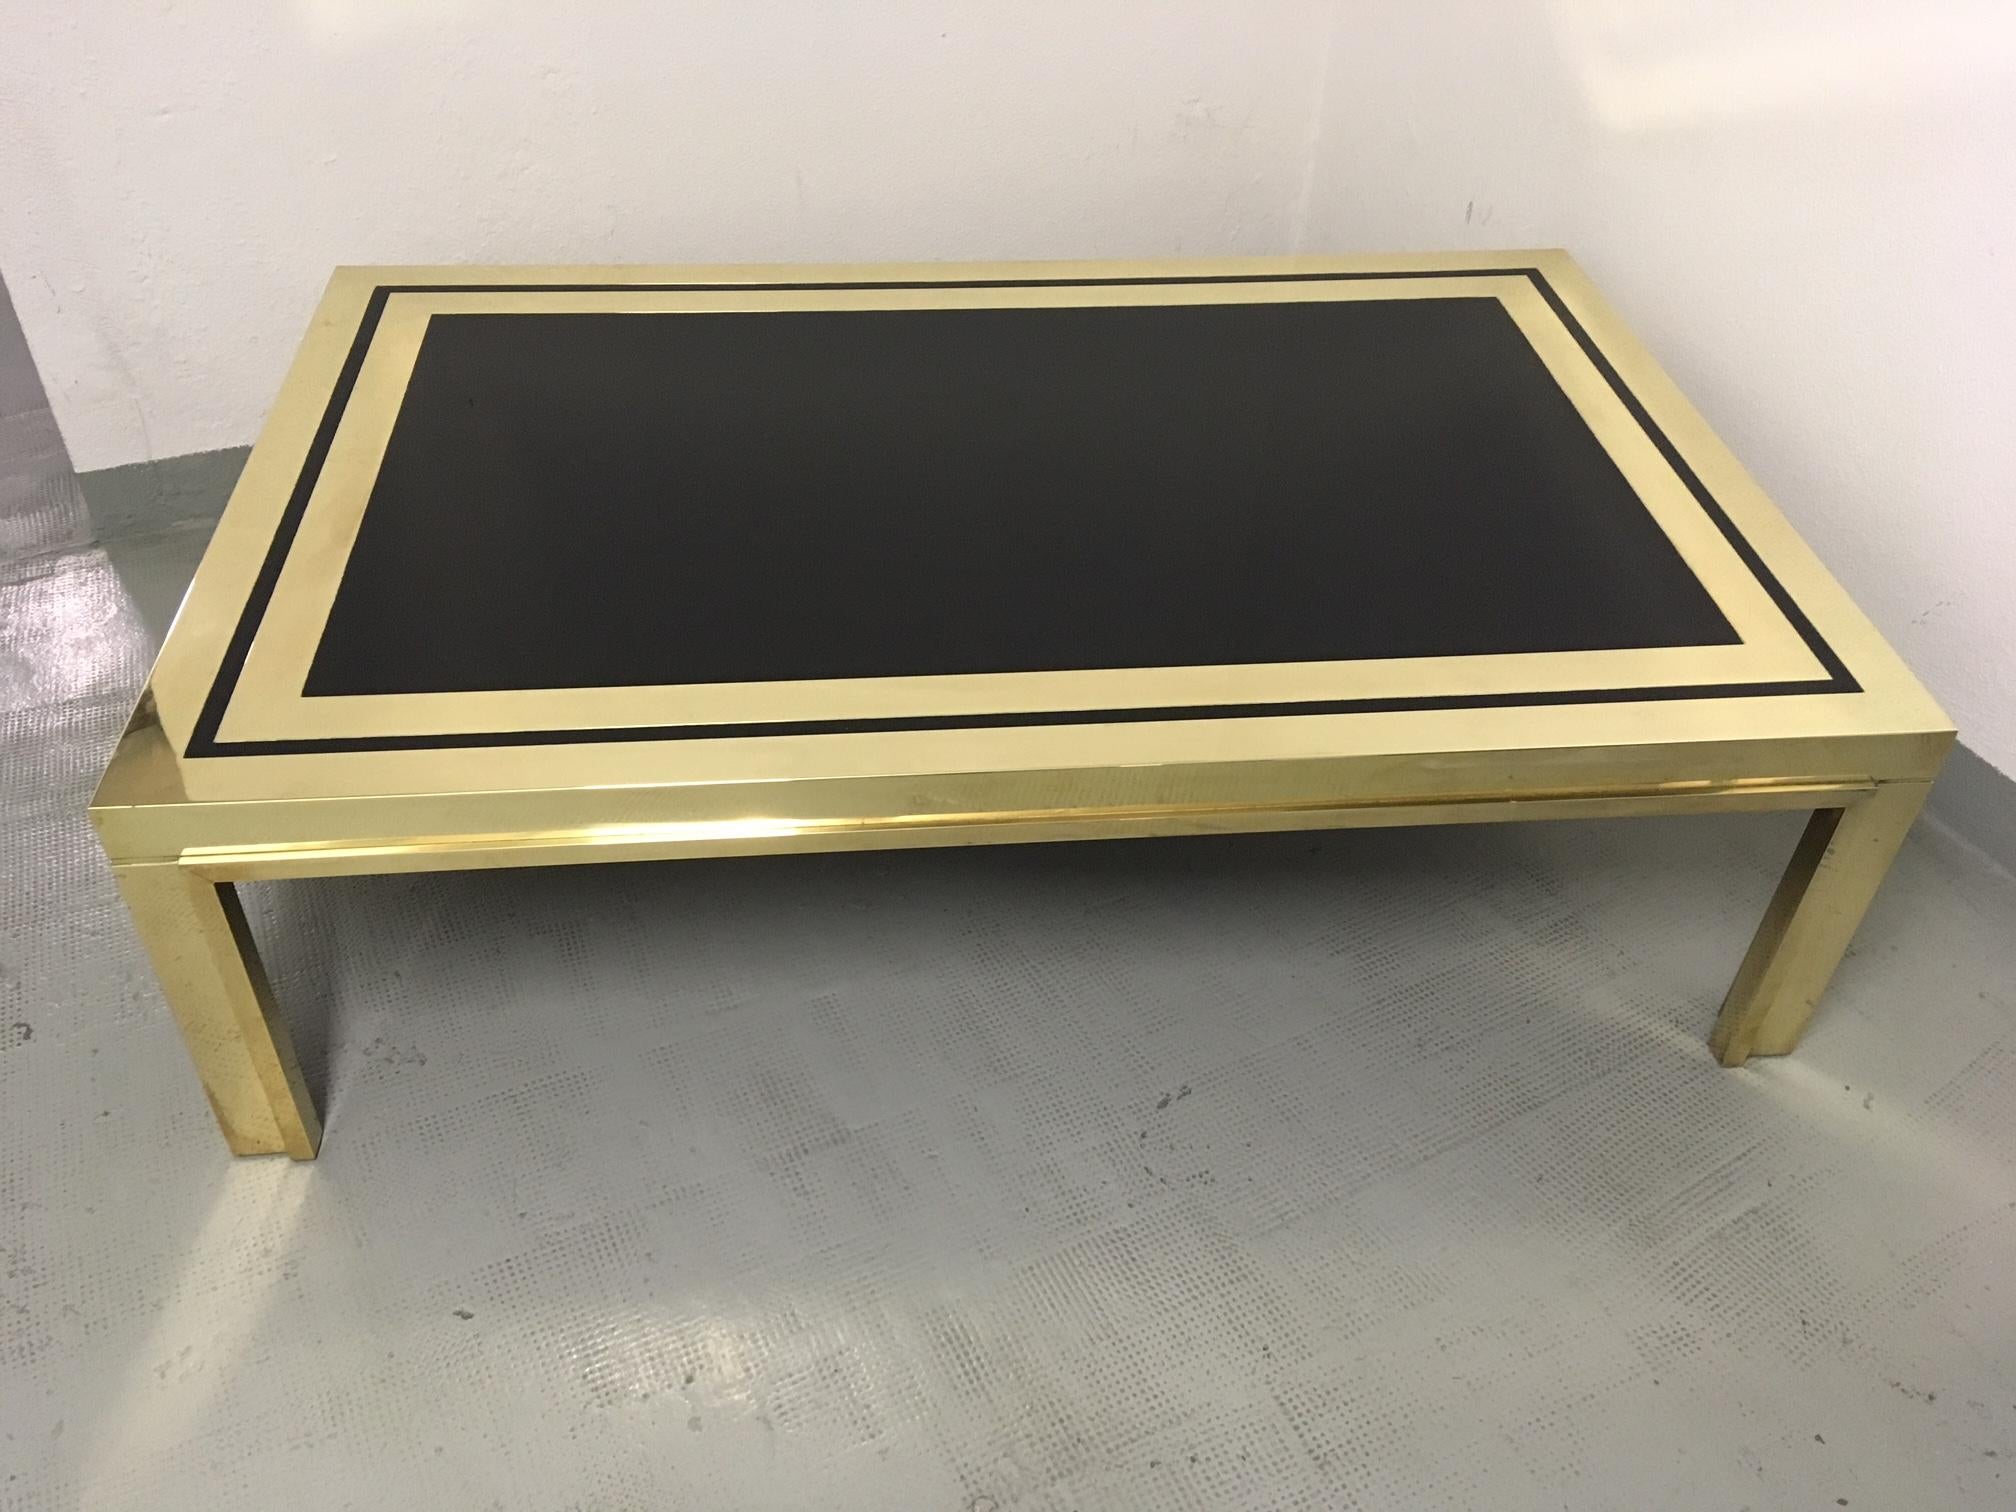 Luxury brass and black glass coffee table by Liwan's Rome Italy, circa 1970s
Good condition, signed.